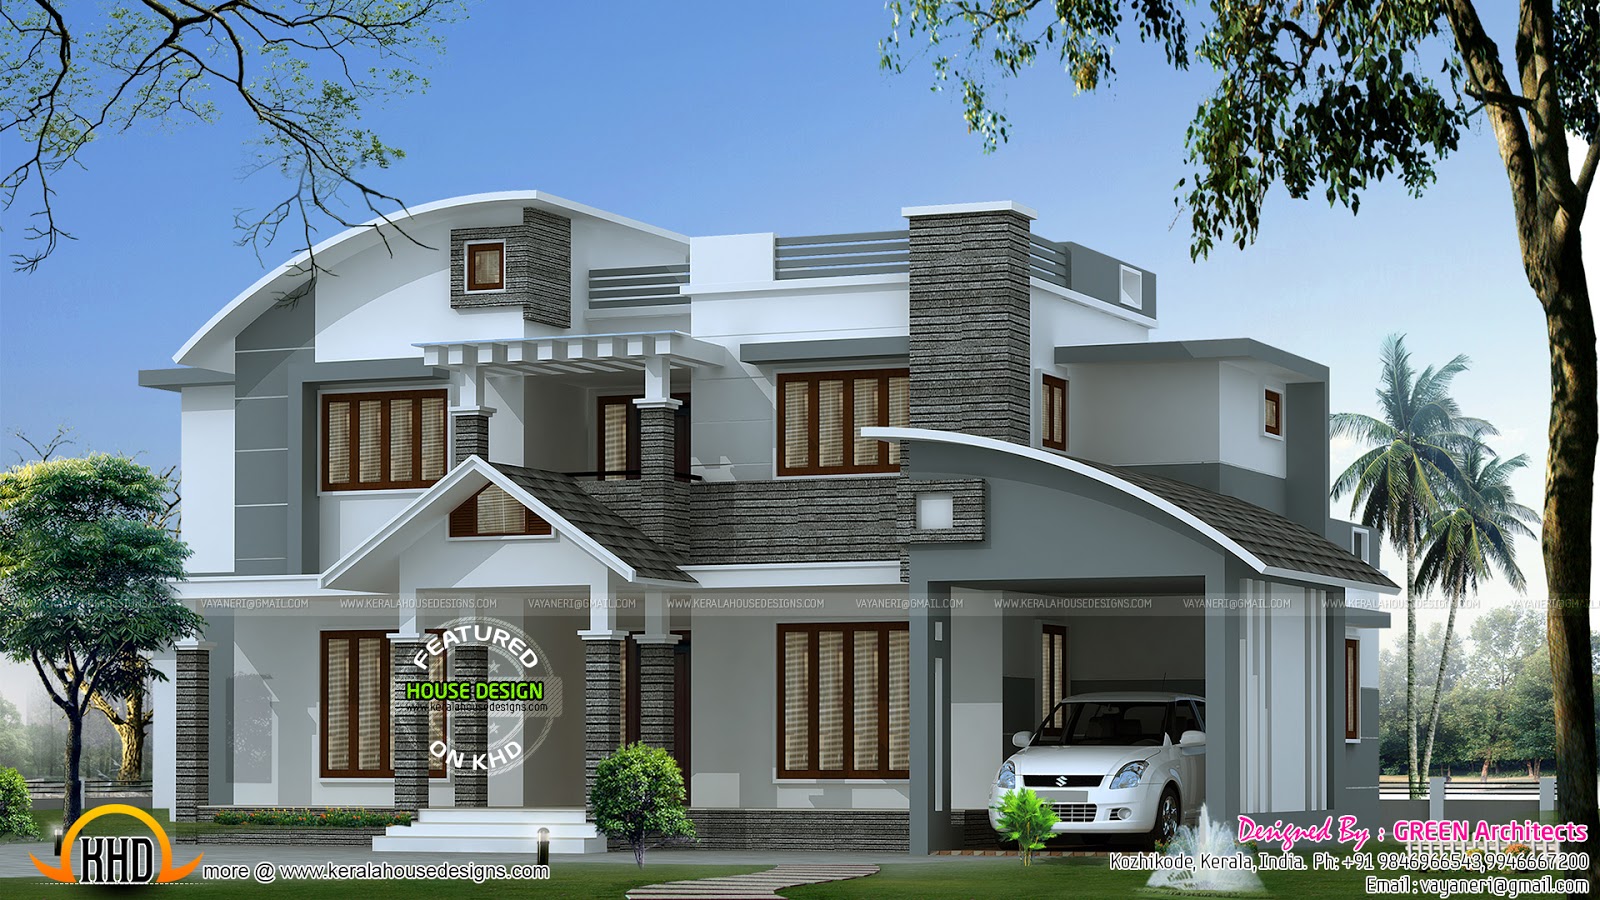 Contemporary mix house  in 2500  sq  ft  Kerala  home  design  